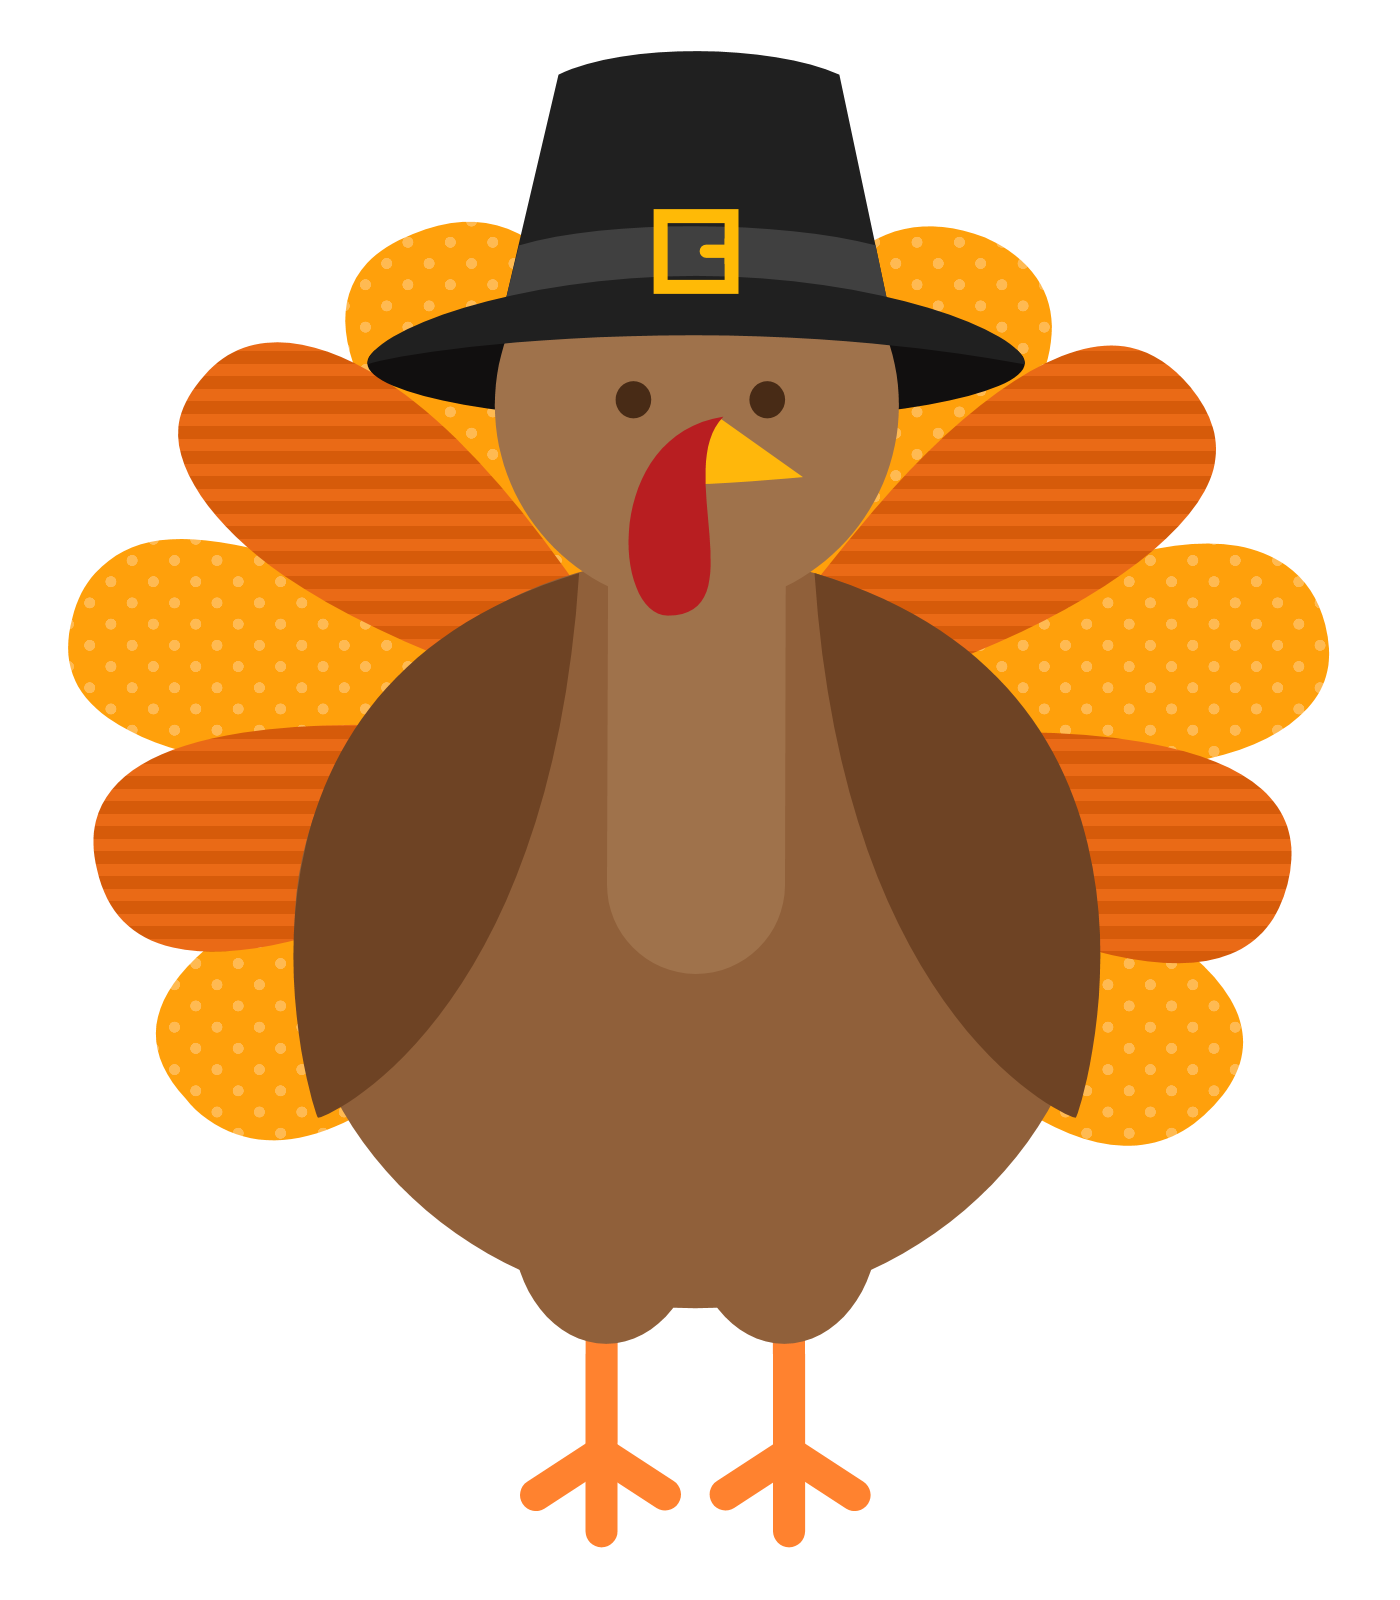 Cute Thanksgiving Turkeys Images  Pictures - Becuo